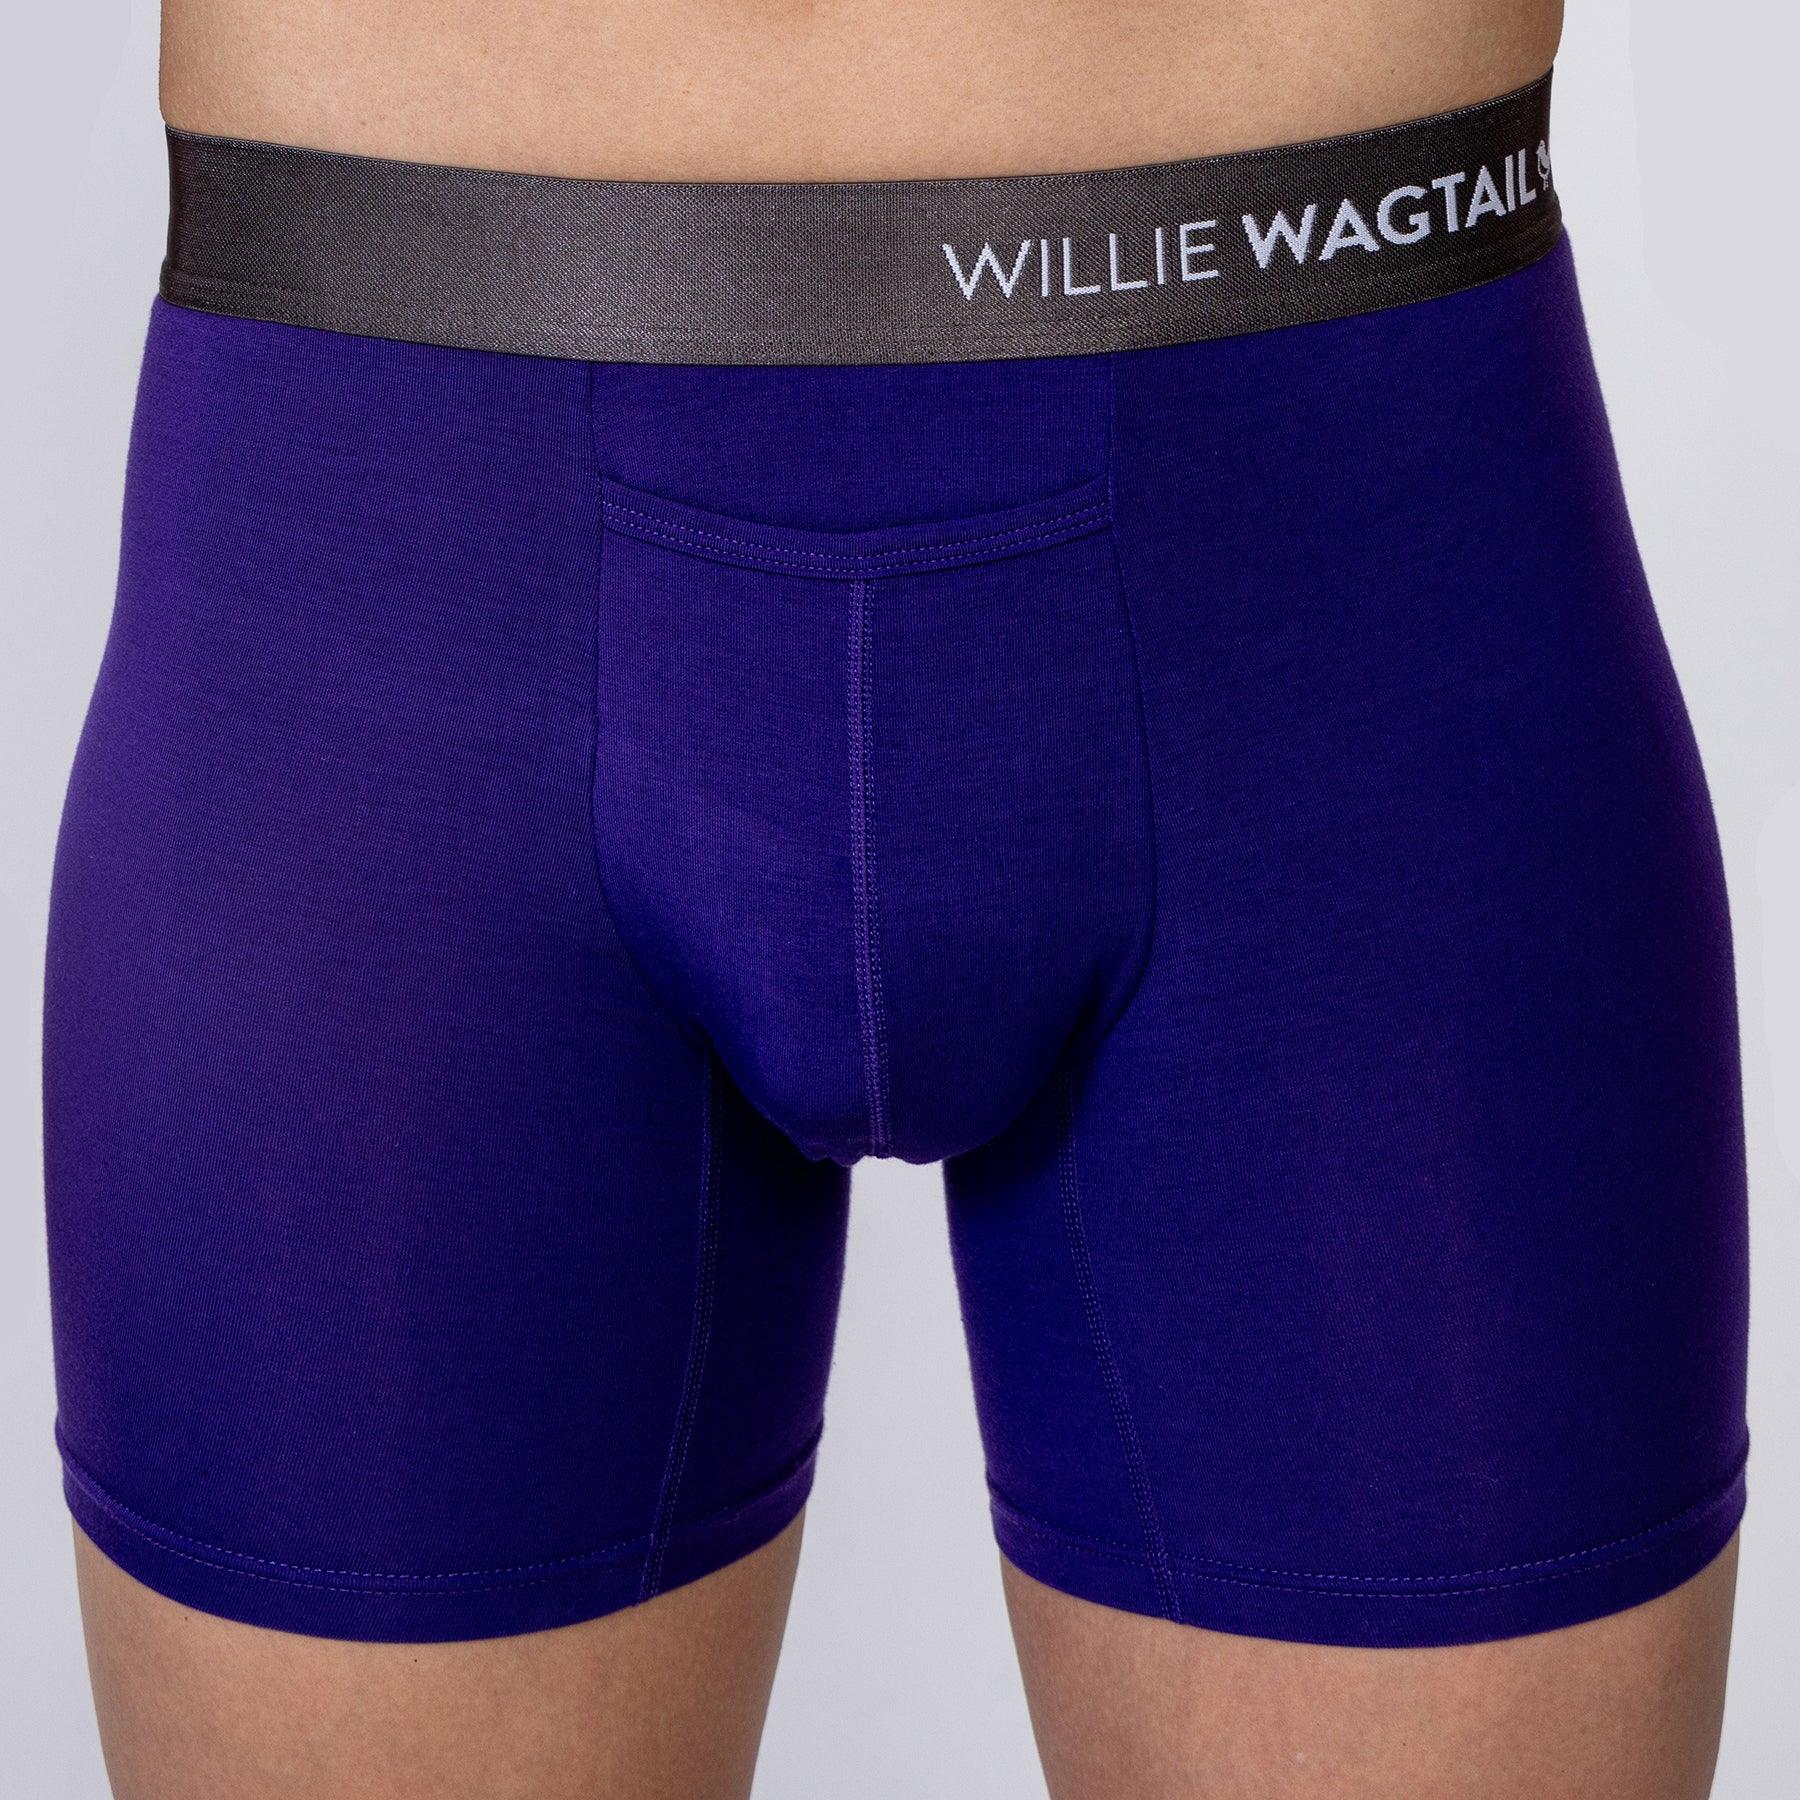 Full Package (6-Pack Boxer Briefs) - Willie Wagtail